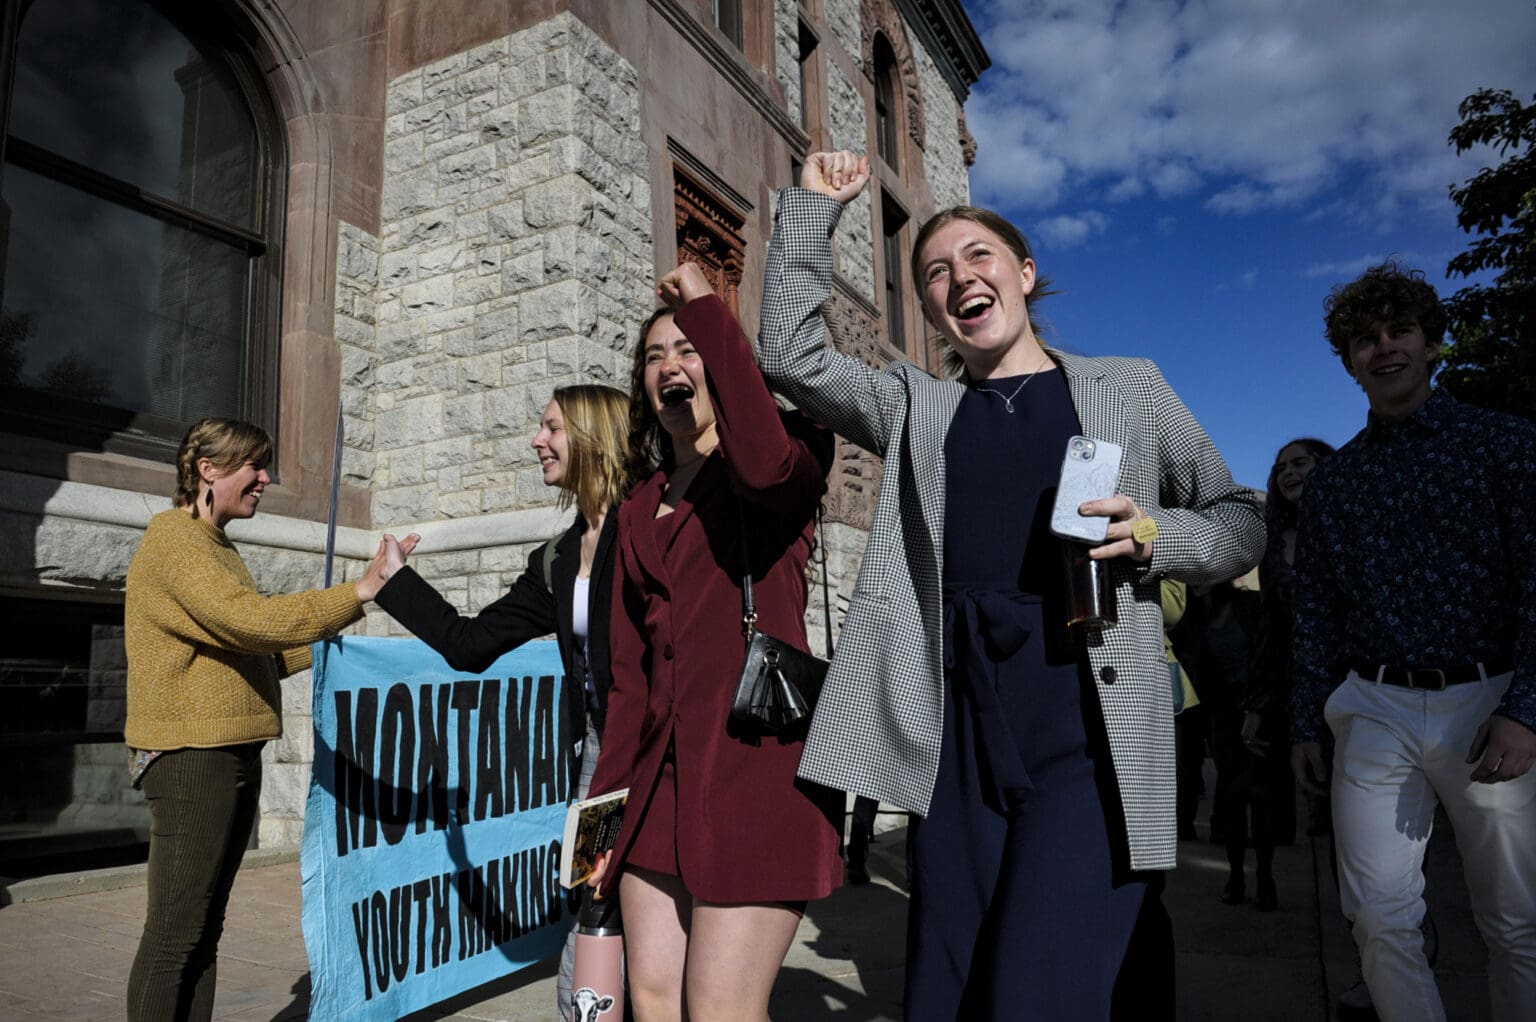 Youth plaintiffs in the climate change lawsuit